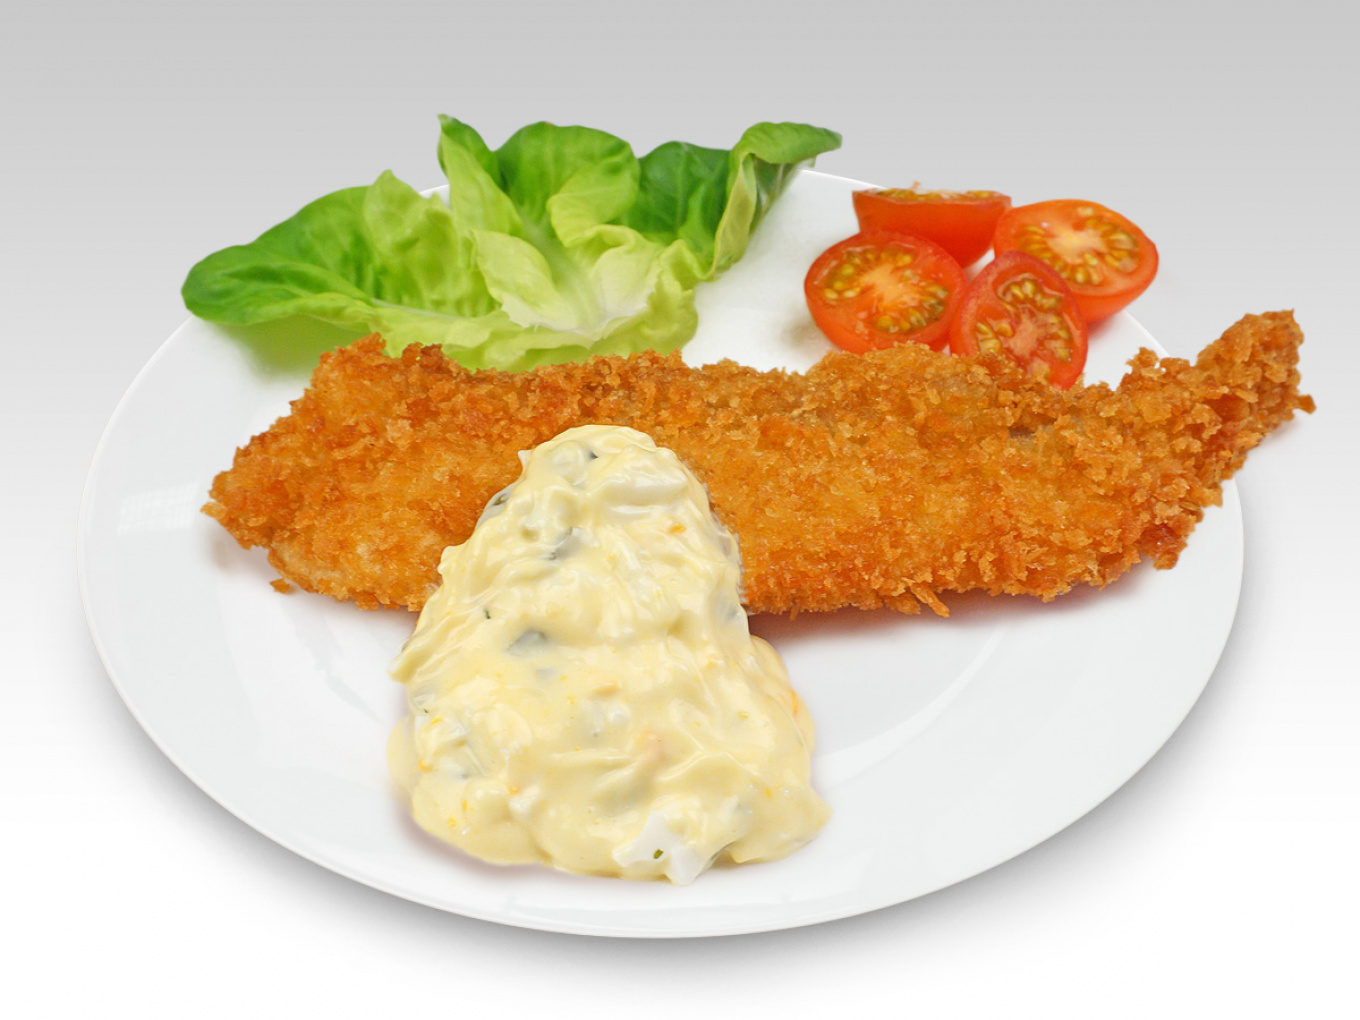 Fried Breaded Fish with Tartar Sauce